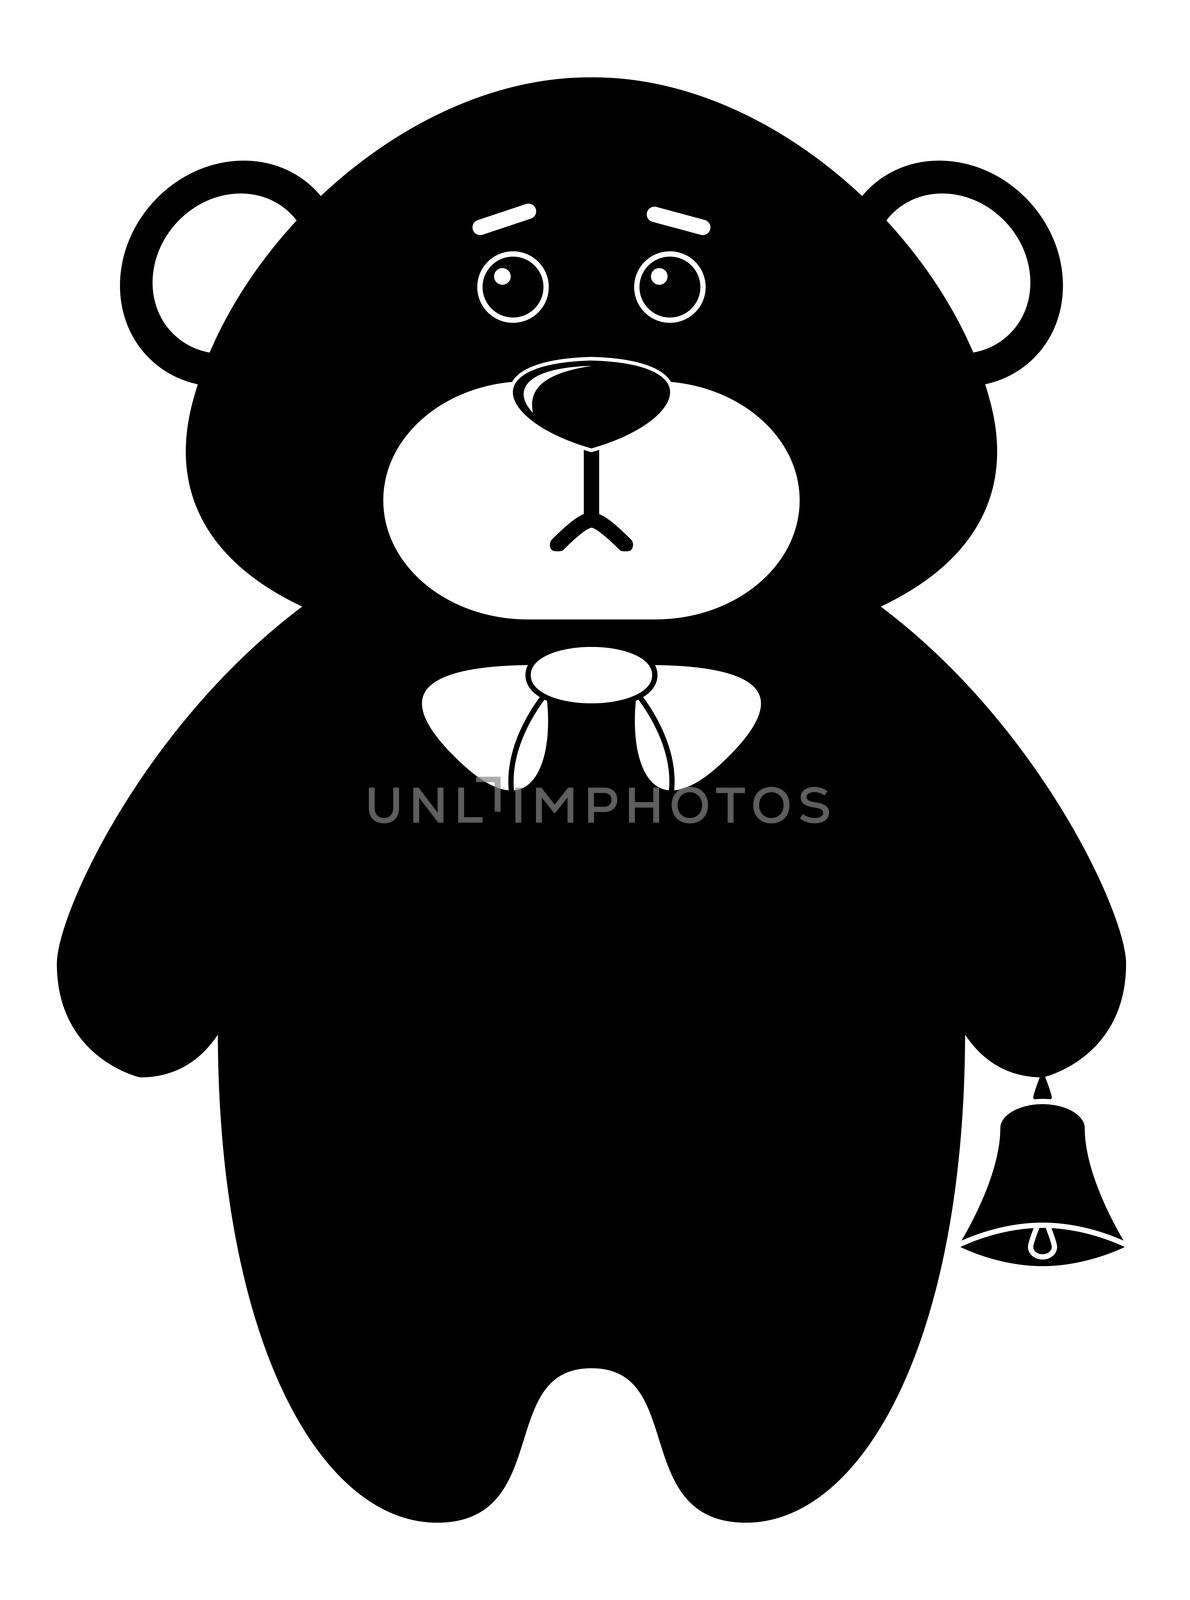 Toy teddy bear a tilde with a bell, black contours on white background.